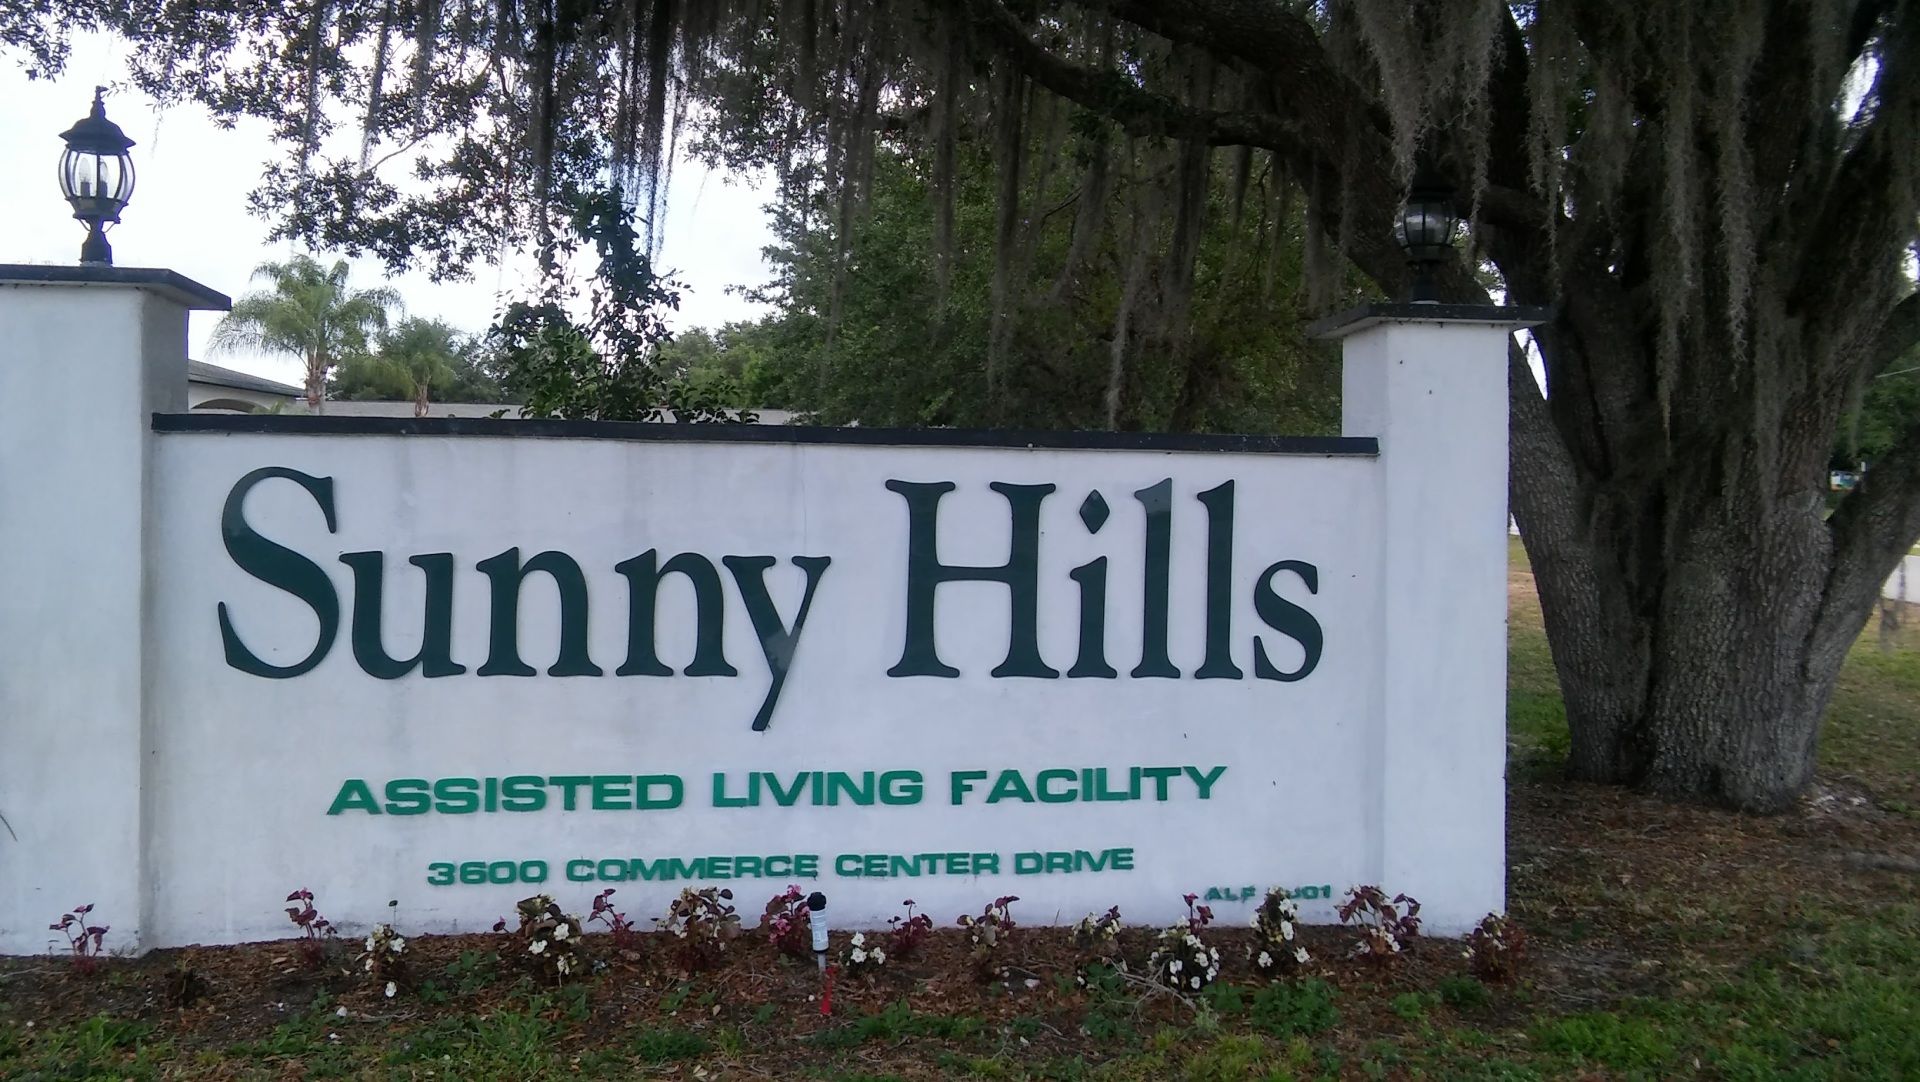 Sunny Hills of Sebring senior living community amidst lush park with various trees and wildlife.